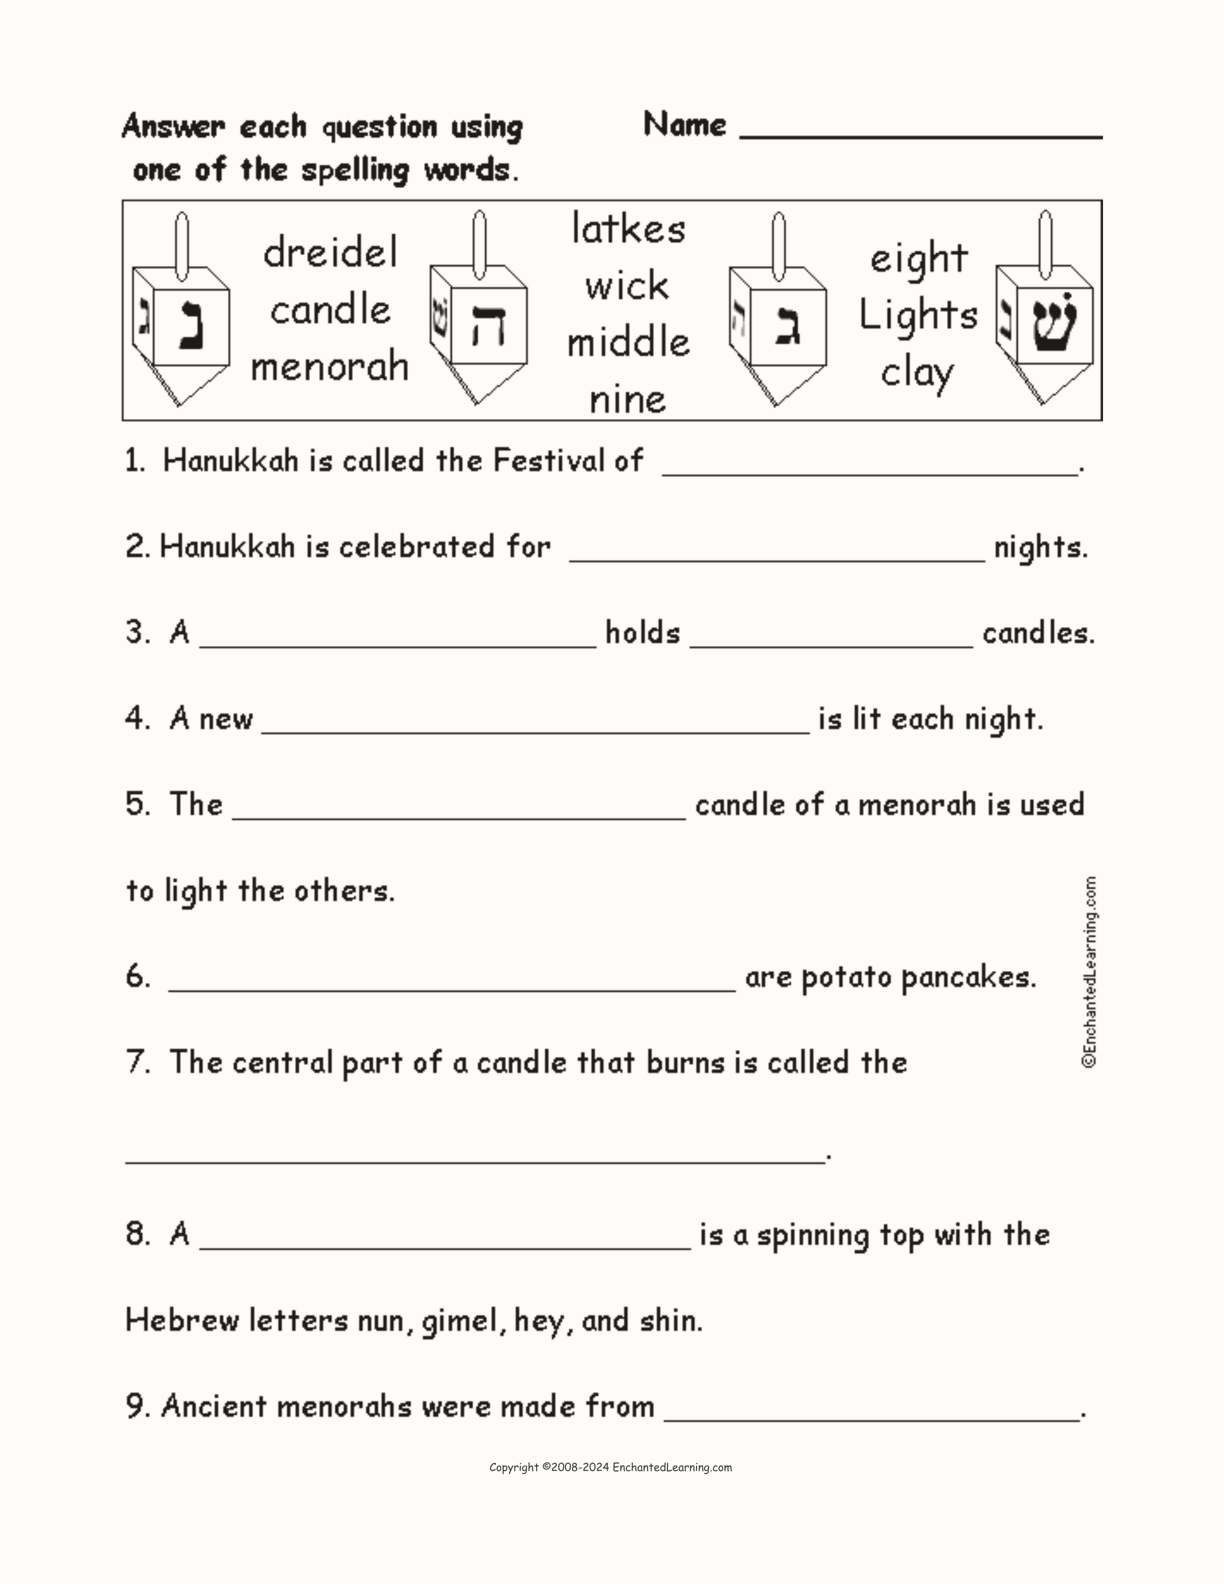 Hannukah: Spelling Word Questions interactive worksheet page 1